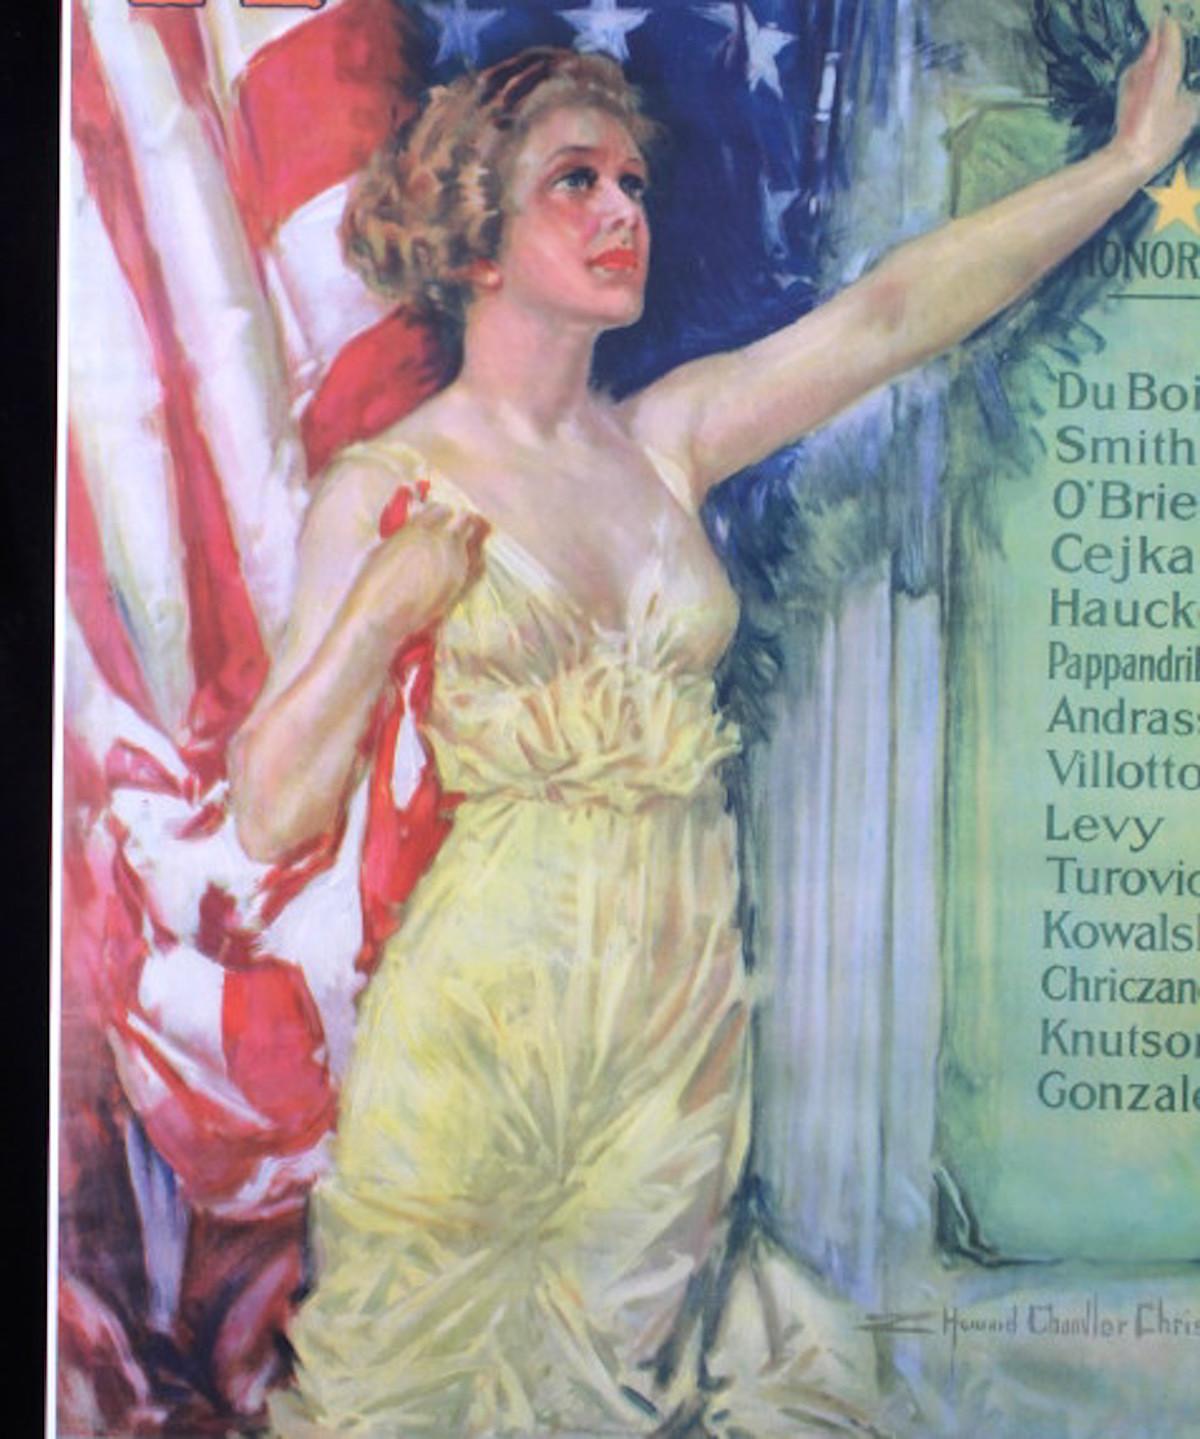 This is an original WWI Victory Liberty Loan war bond poster from circa 1918. The artwork for the piece was created by Howard Chandler Christy, an American artist and illustrator in the early 1900s. The poster shows a wonderful image of Lady Liberty